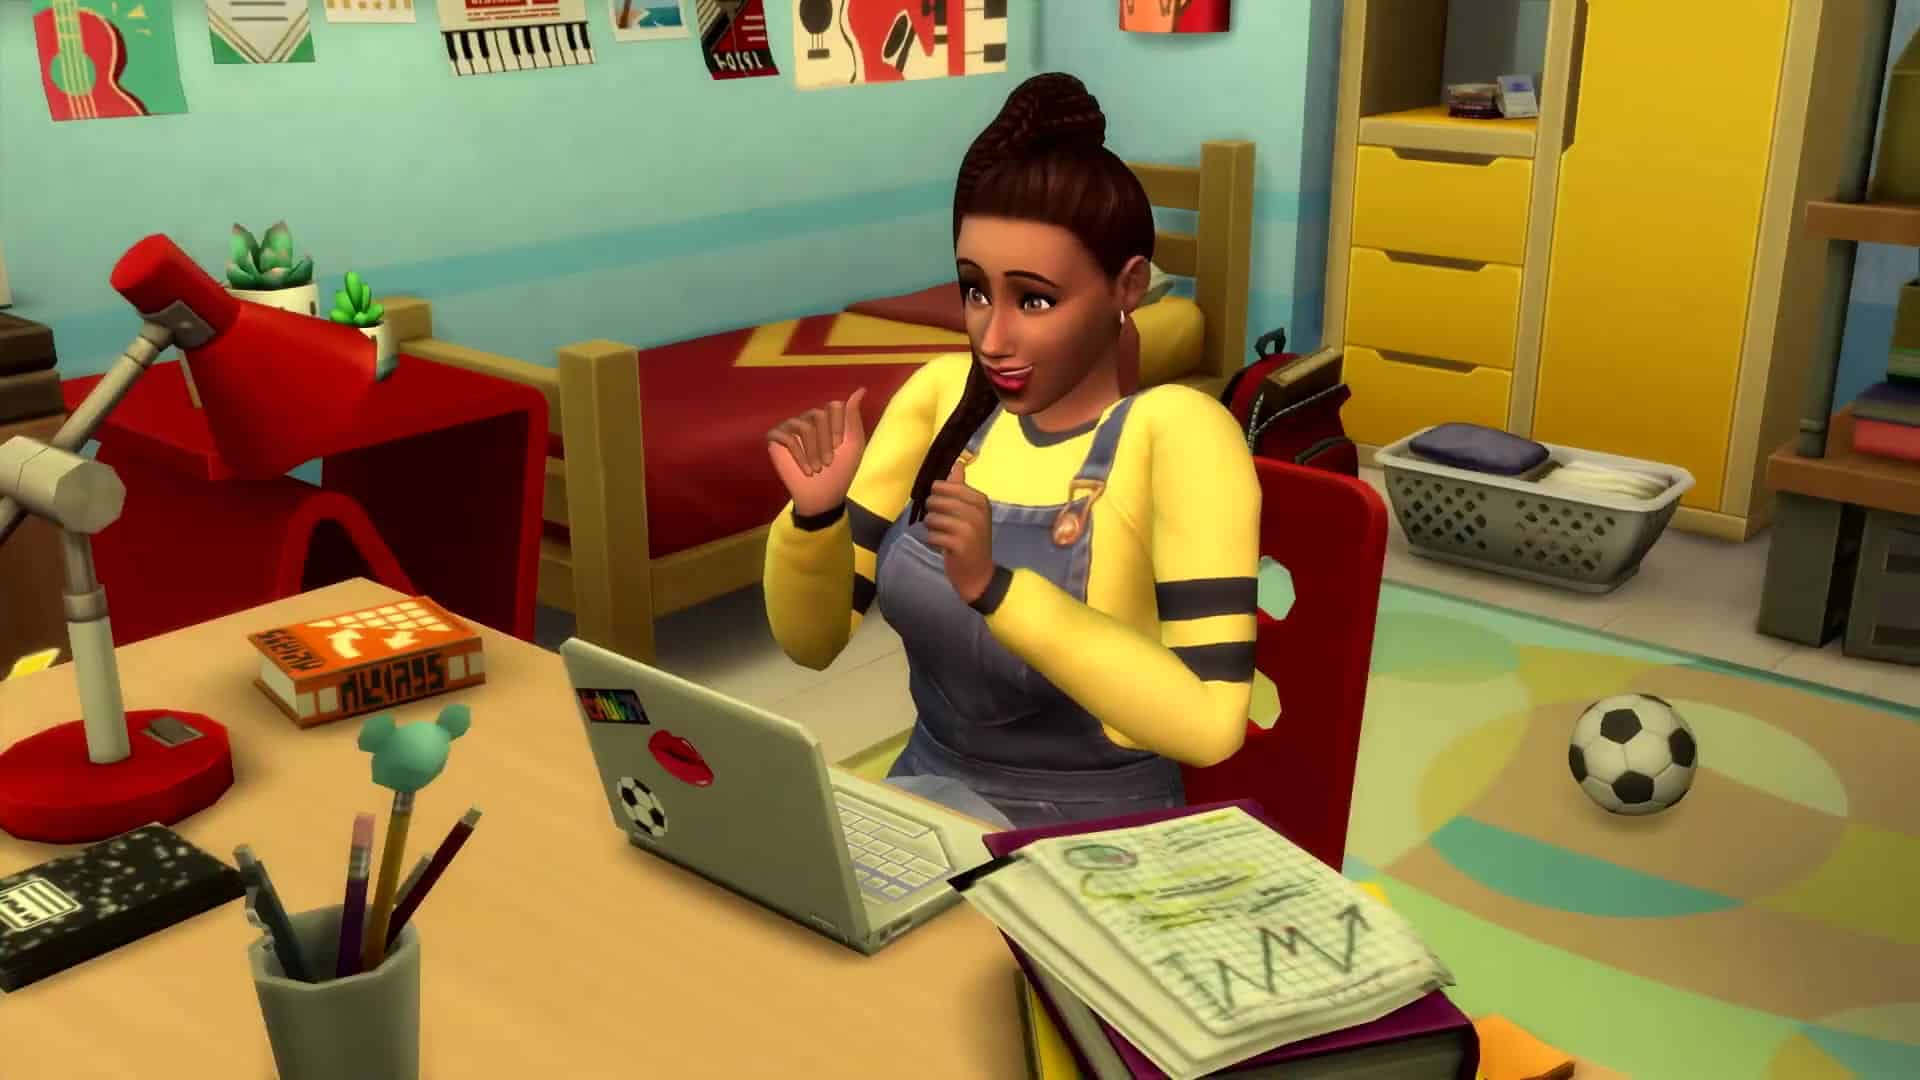 Sims 4 Discover University: What was revealed in the deep dive live stream